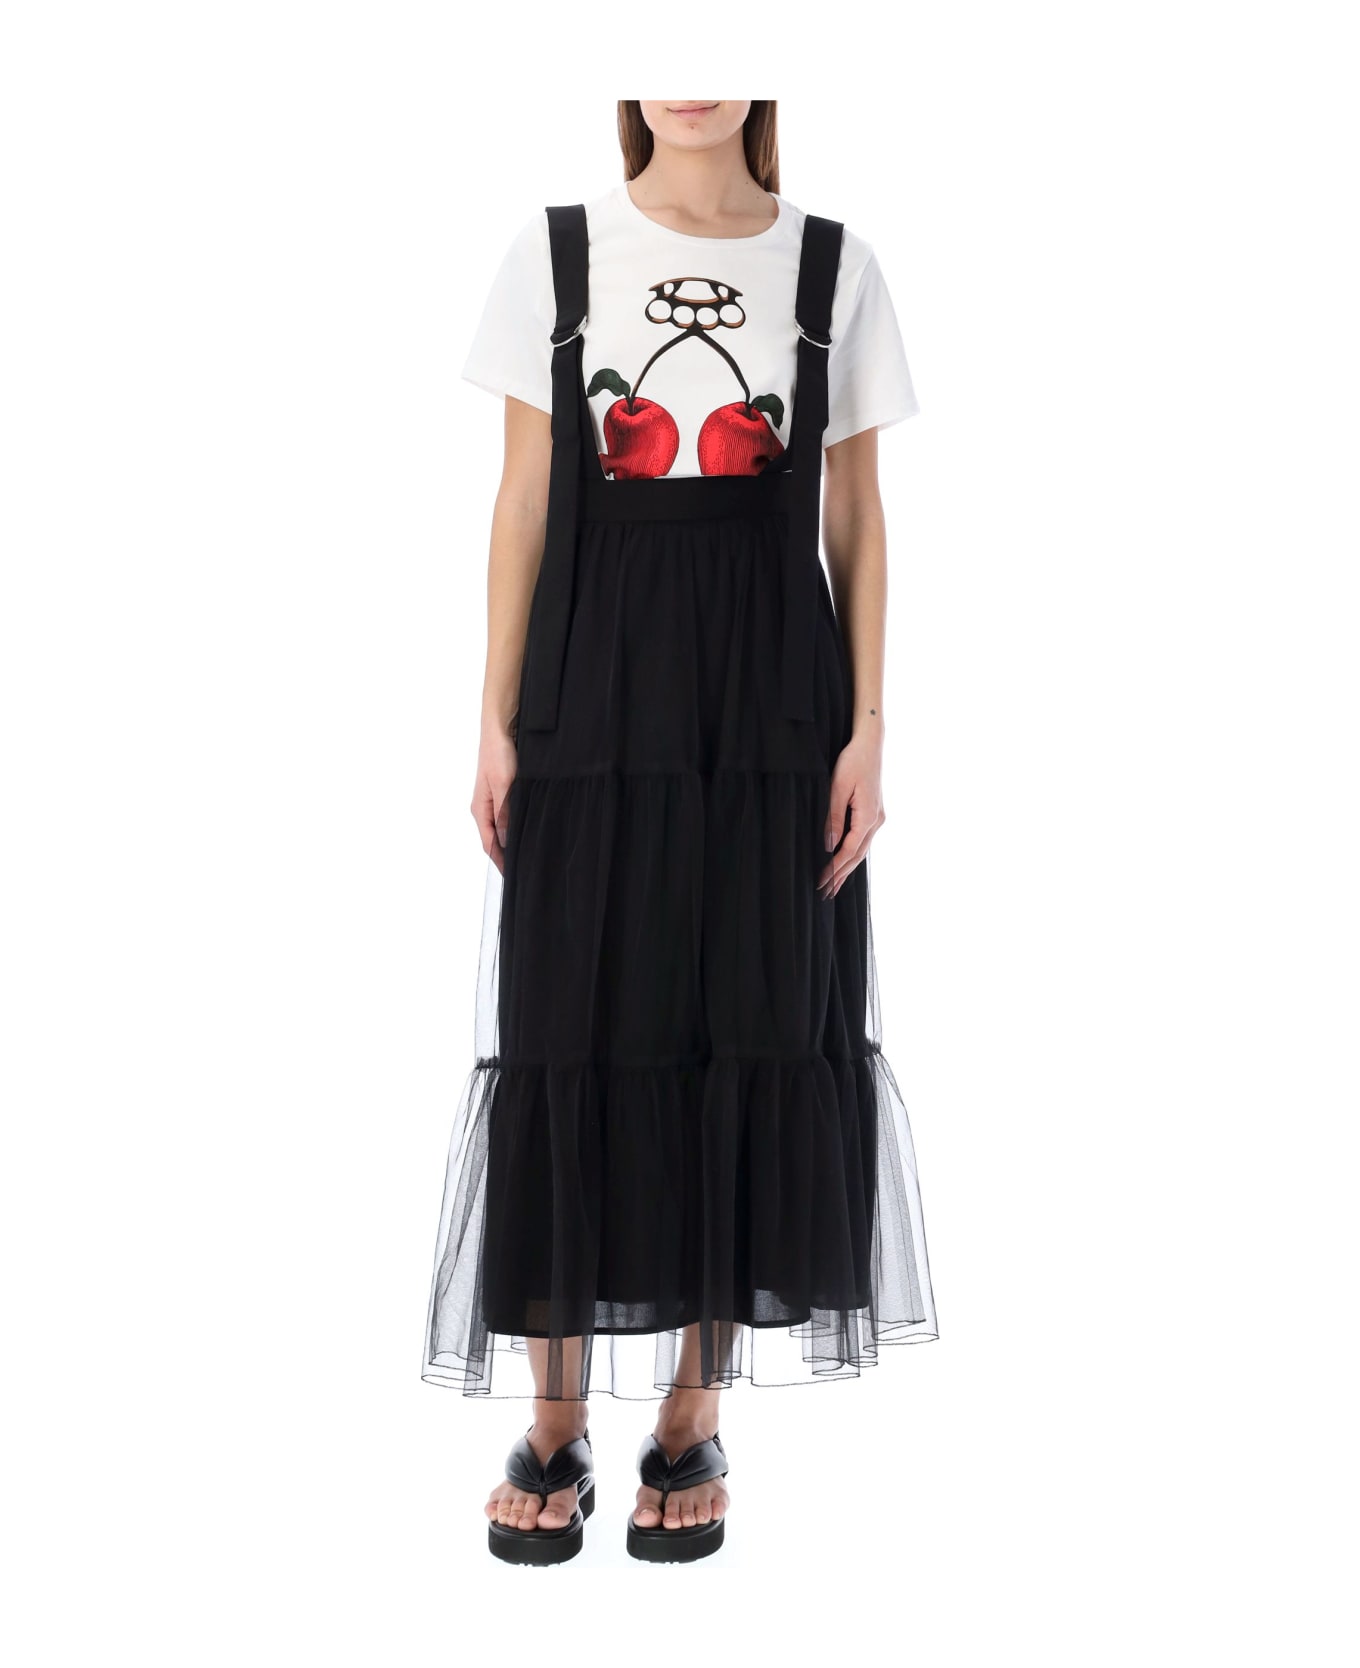 Undercover Jun Takahashi Tulle Skirt With Straps - BLACK